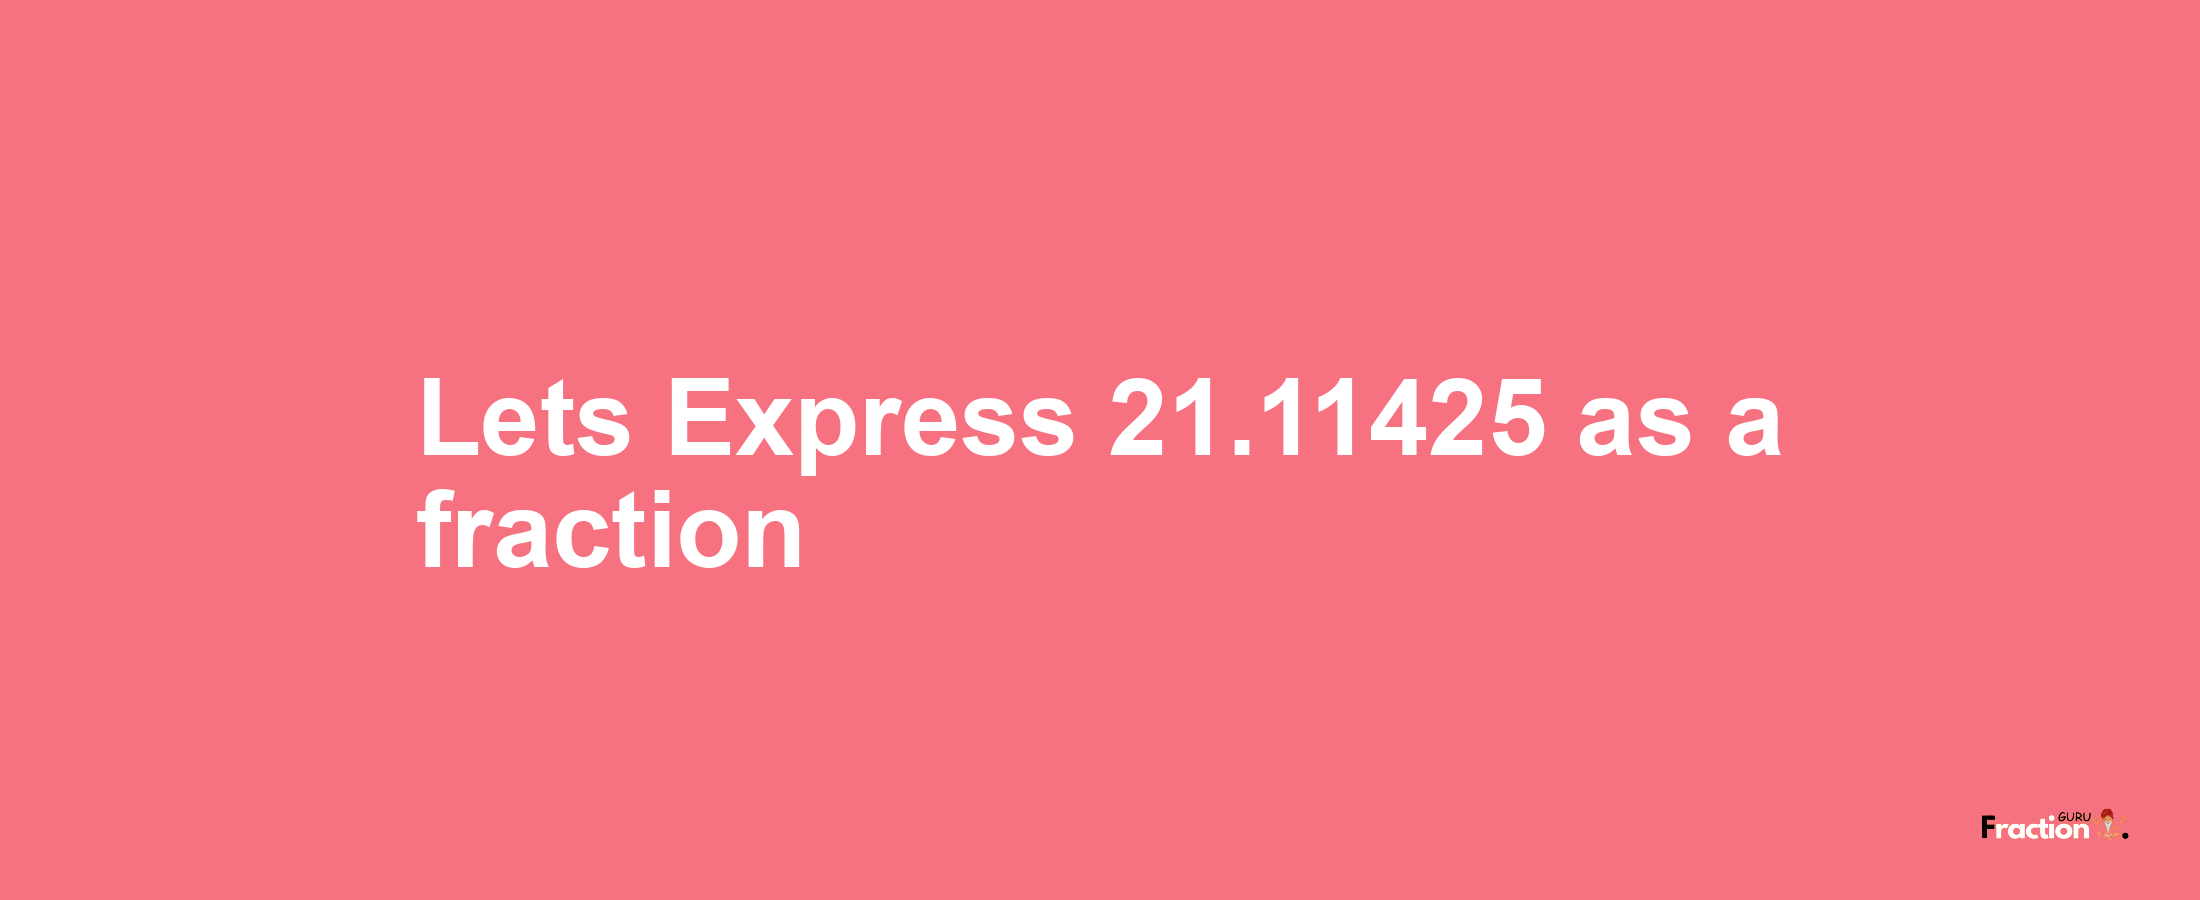 Lets Express 21.11425 as afraction